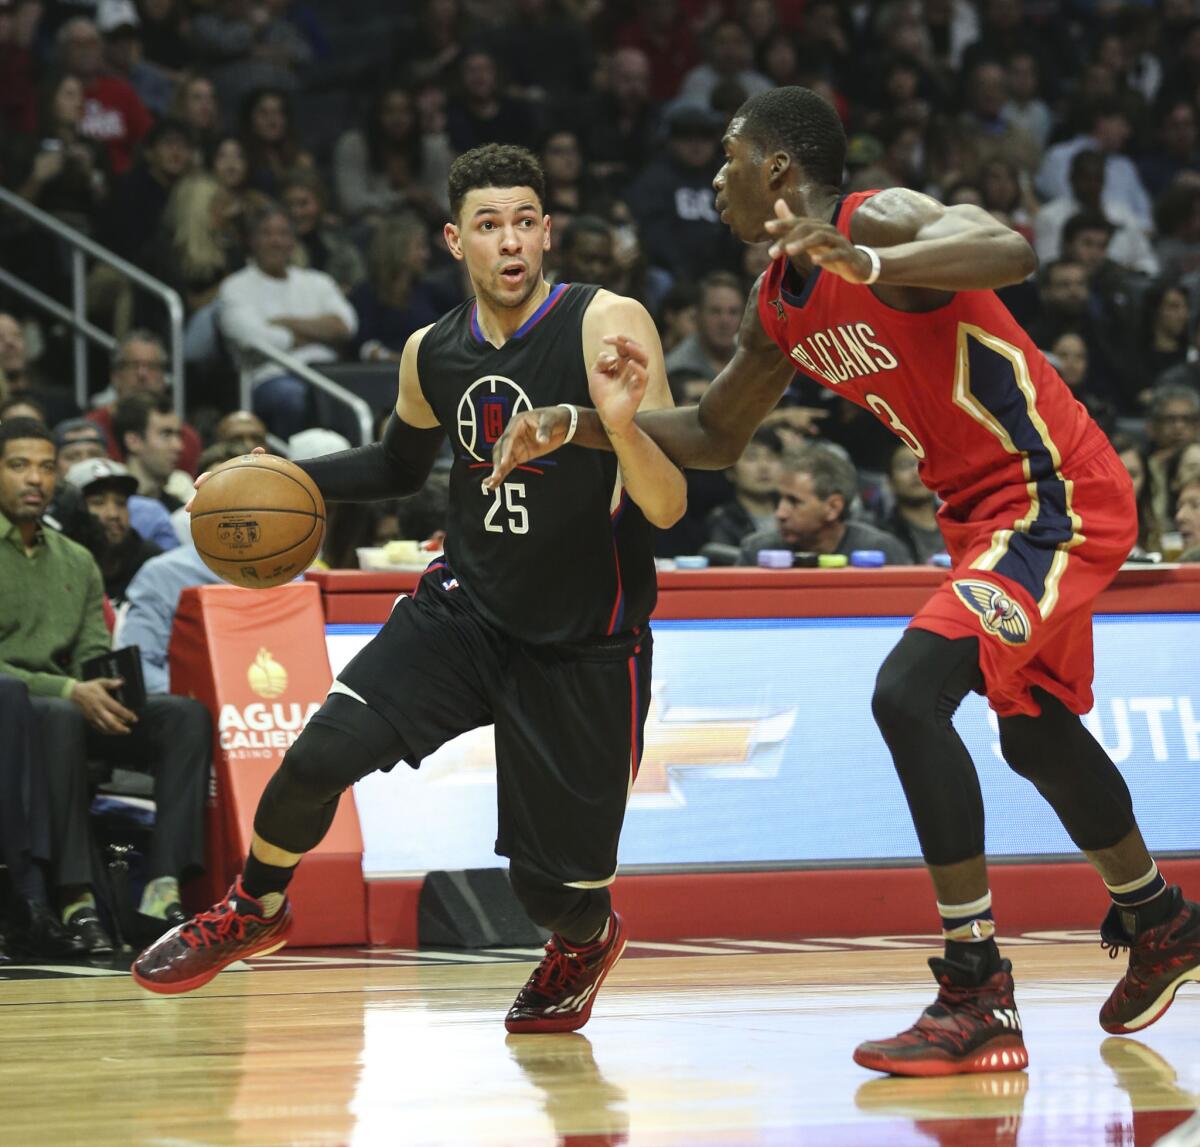 Clippers guard Austin Rivers drives against New Orleans forward Cheick Diallo on Saturday in a game in which he suffered a concussion.